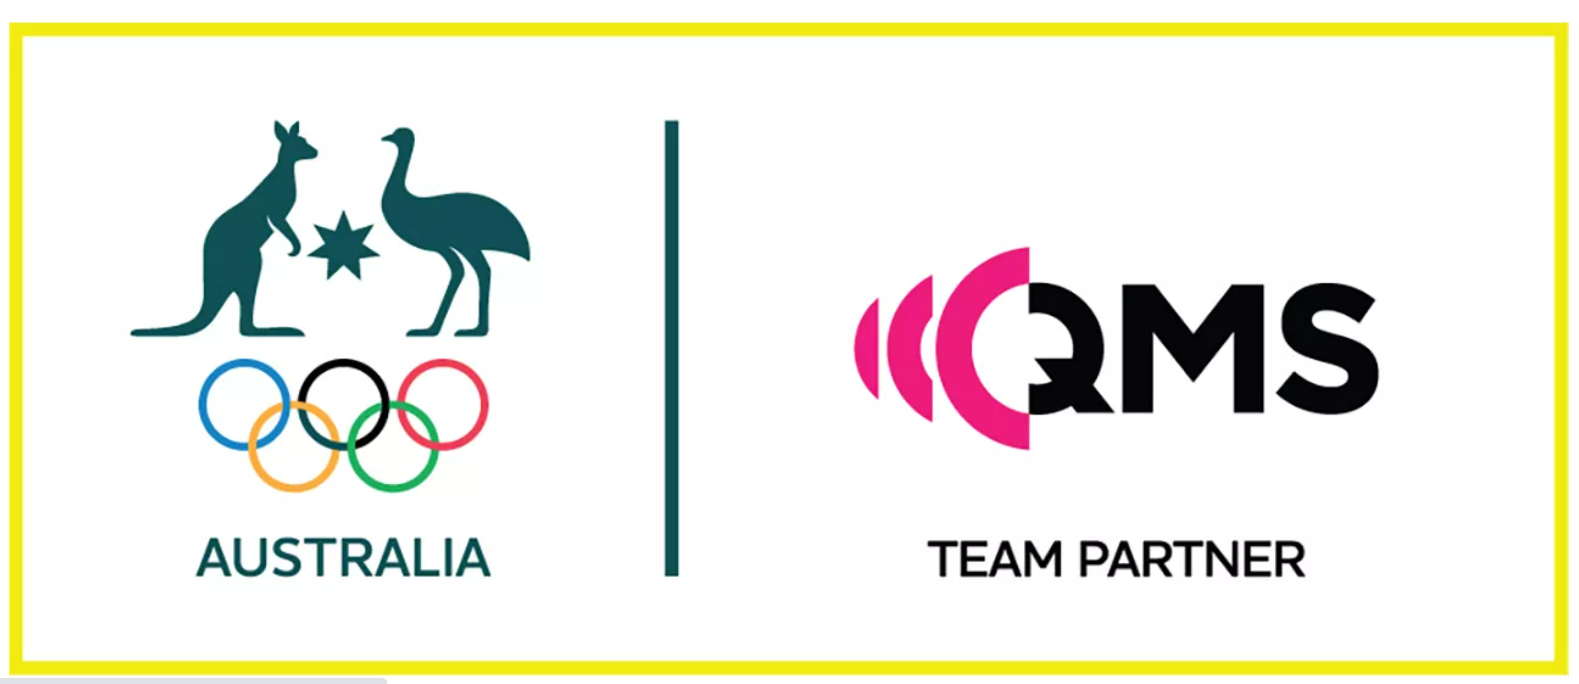 Digital outdoor media company QMS has become the official outdoor media partner of the Australian Olympic teams for Paris 2024 and Milan Cortina 2026 ©AOC